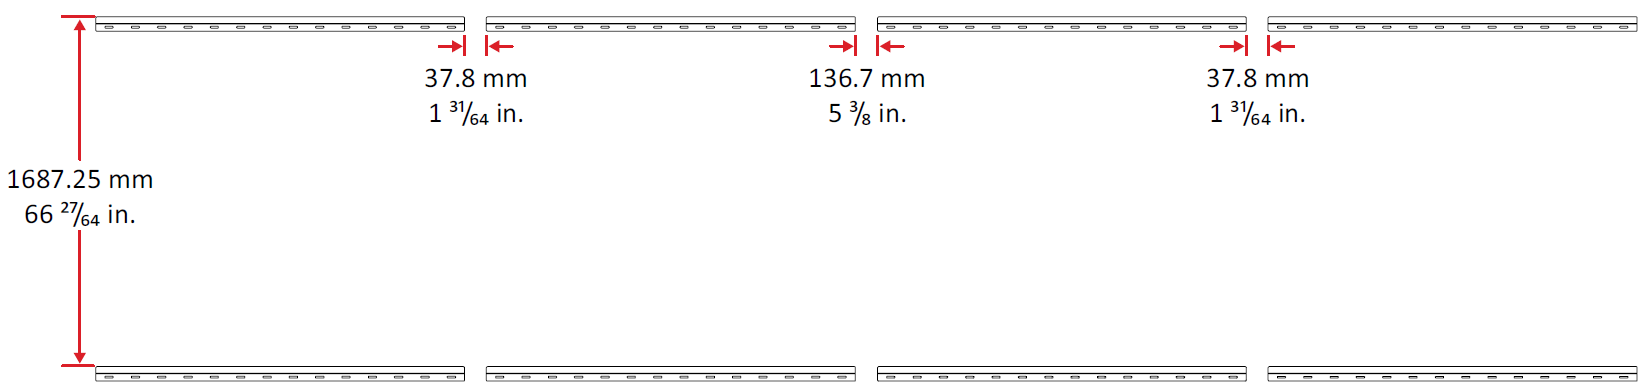 File:LDP163-181 DSS Wall Mount 1.png